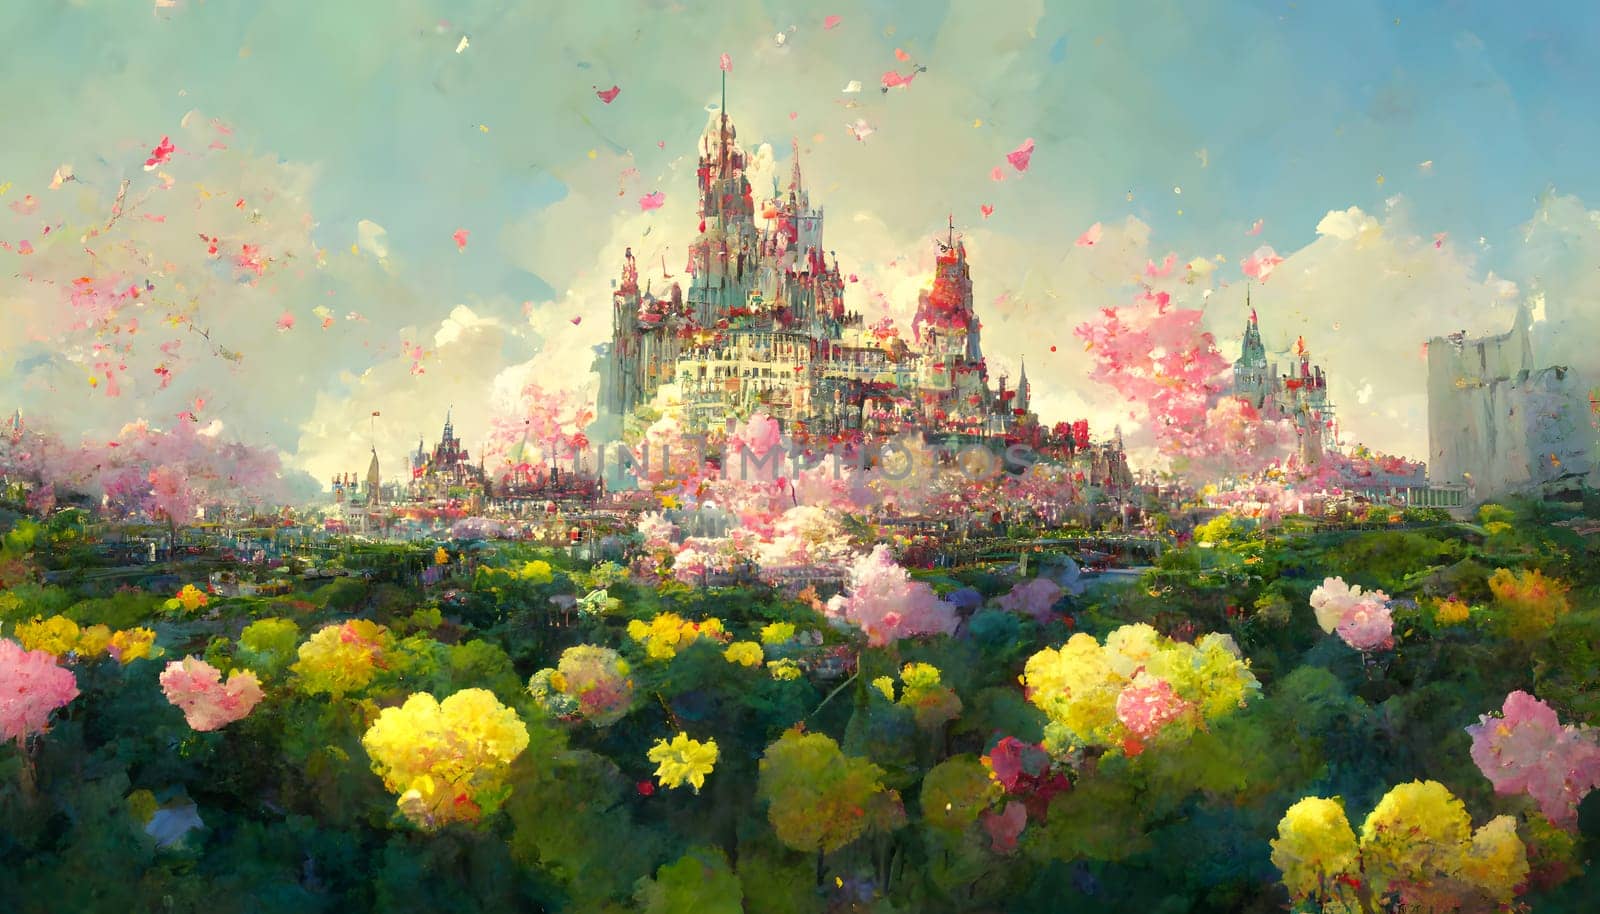 dreamy castles at sunny spring day with pink and yellow flowers in foreground, neural network generated art by z1b